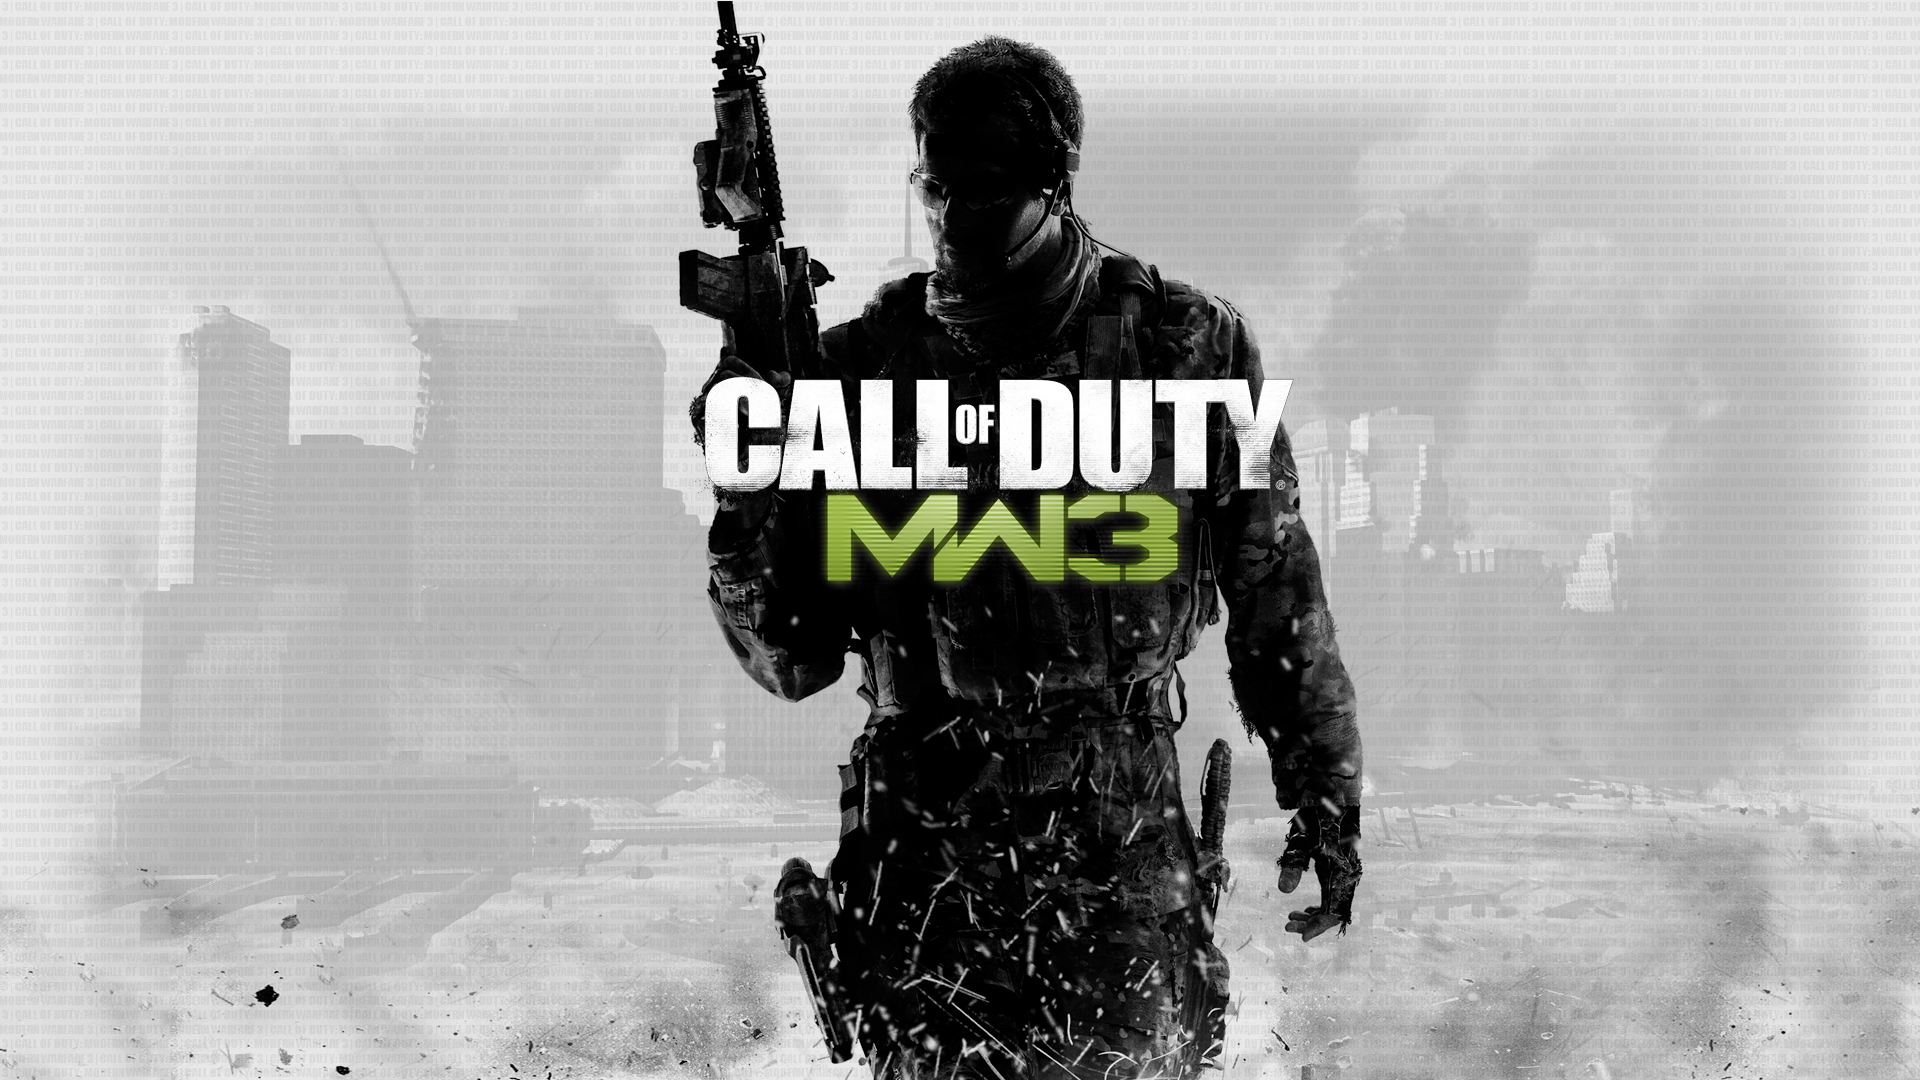 Free Wallpapers   Call of Duty MW3 Full HD wallpaper